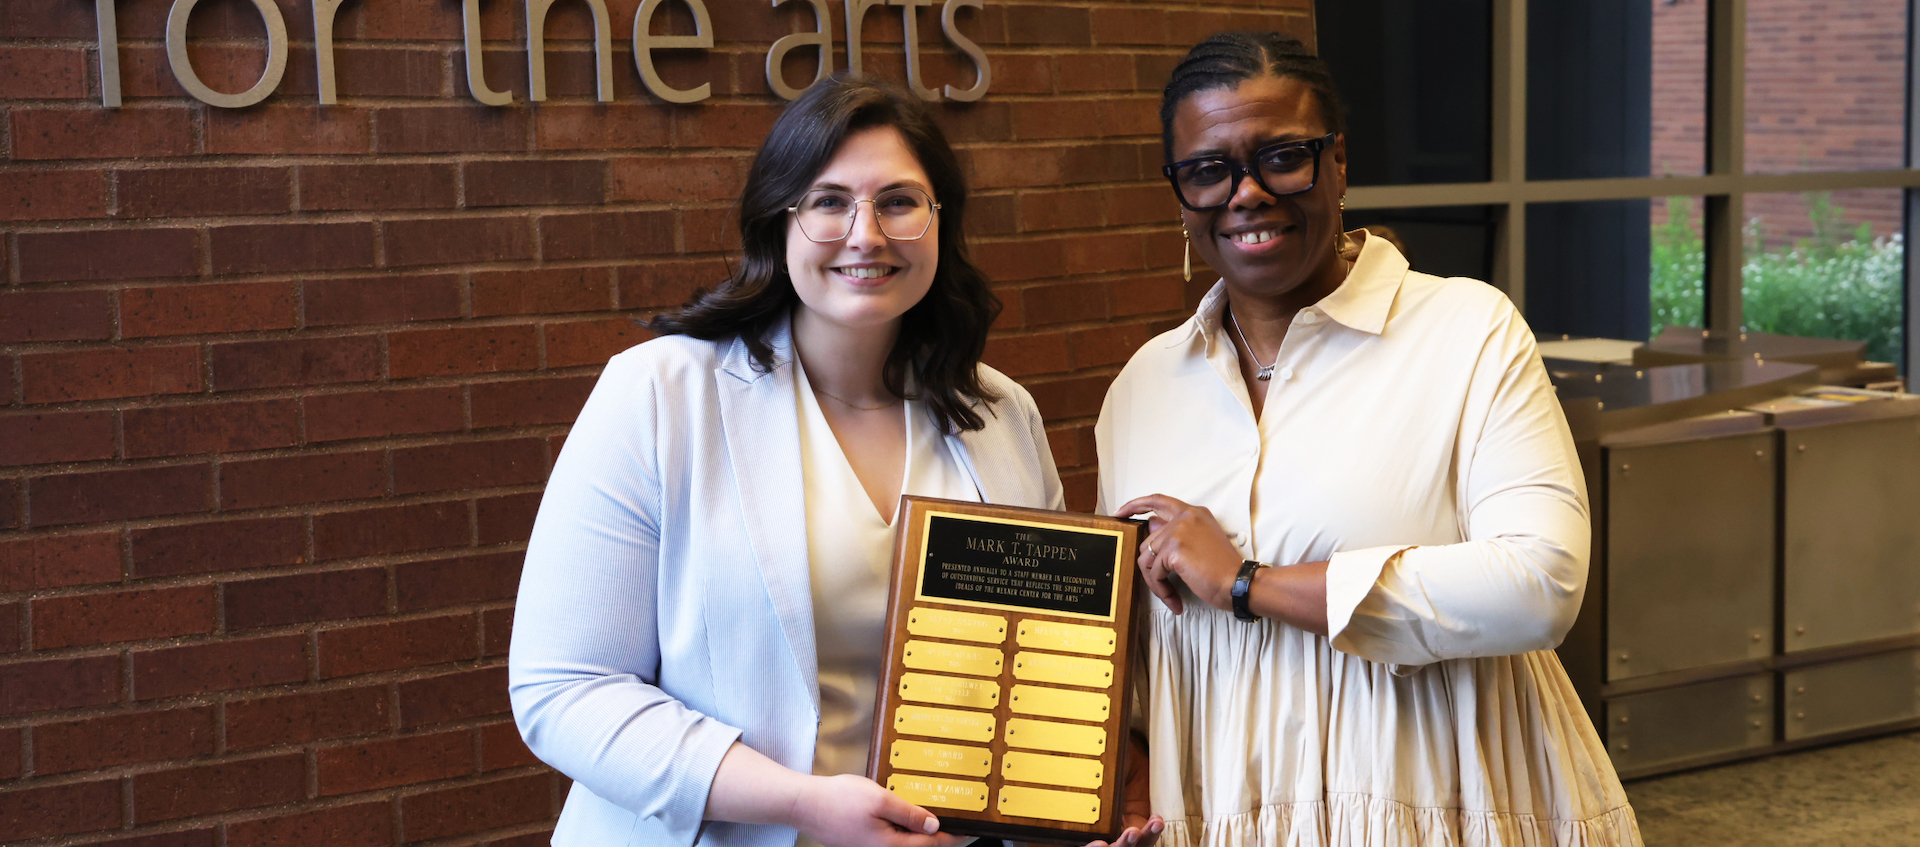 Two women stand against a brick wall smiling and holding an award plaque.